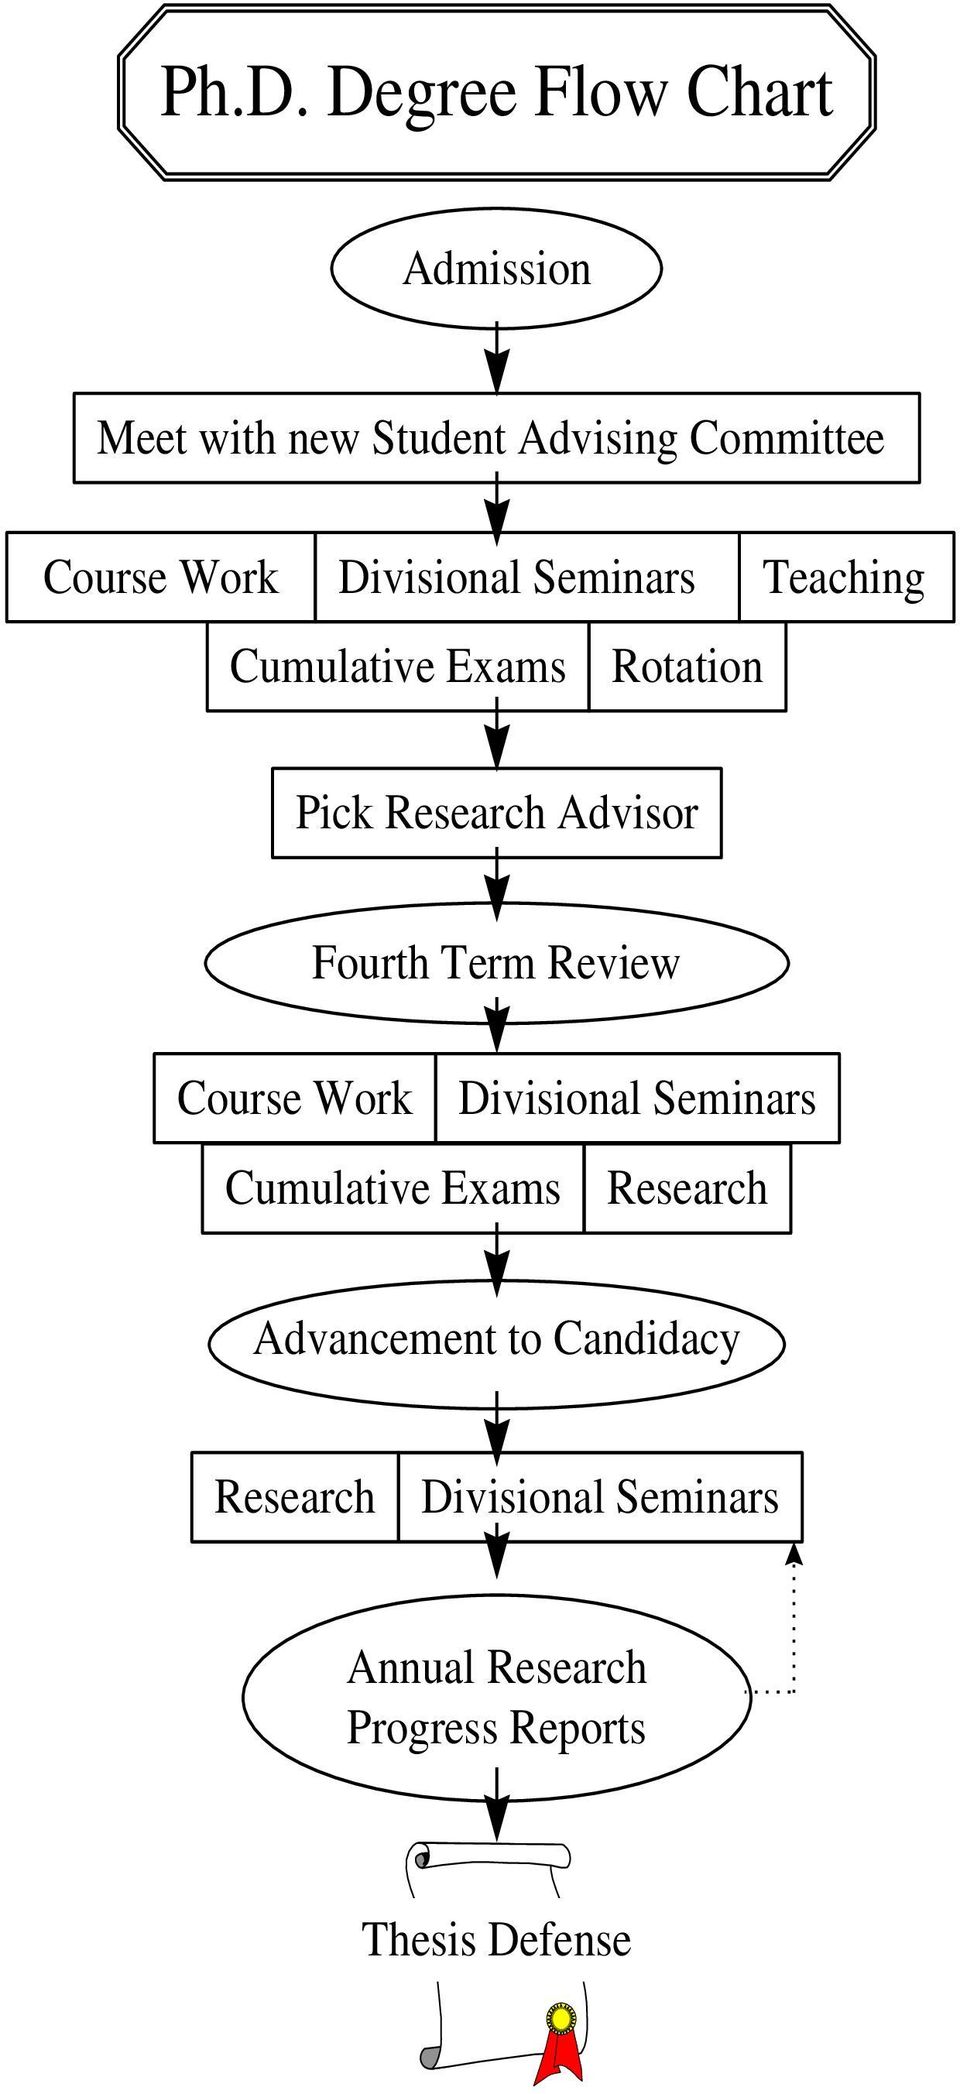 Fourth Term Review Course Work Divisional Seminars Cumulative Exams Research